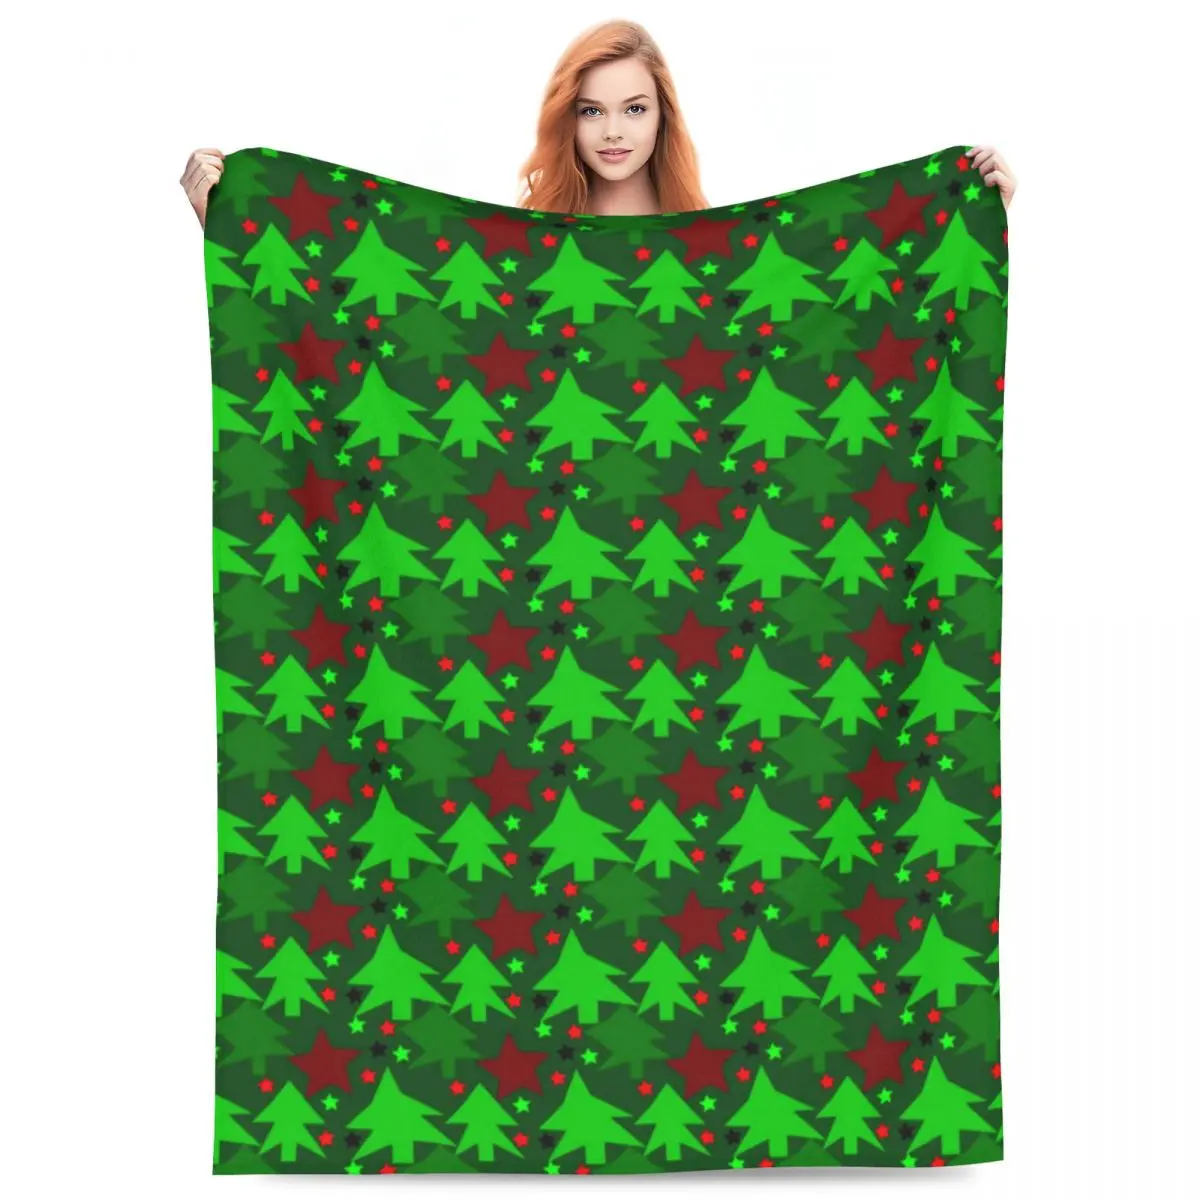 

Green Christmas Tree Flannel Blanket Quality Warm Soft Red Stars Print Throw Blanket Autumn Travel Couch Bed Print Bedspread